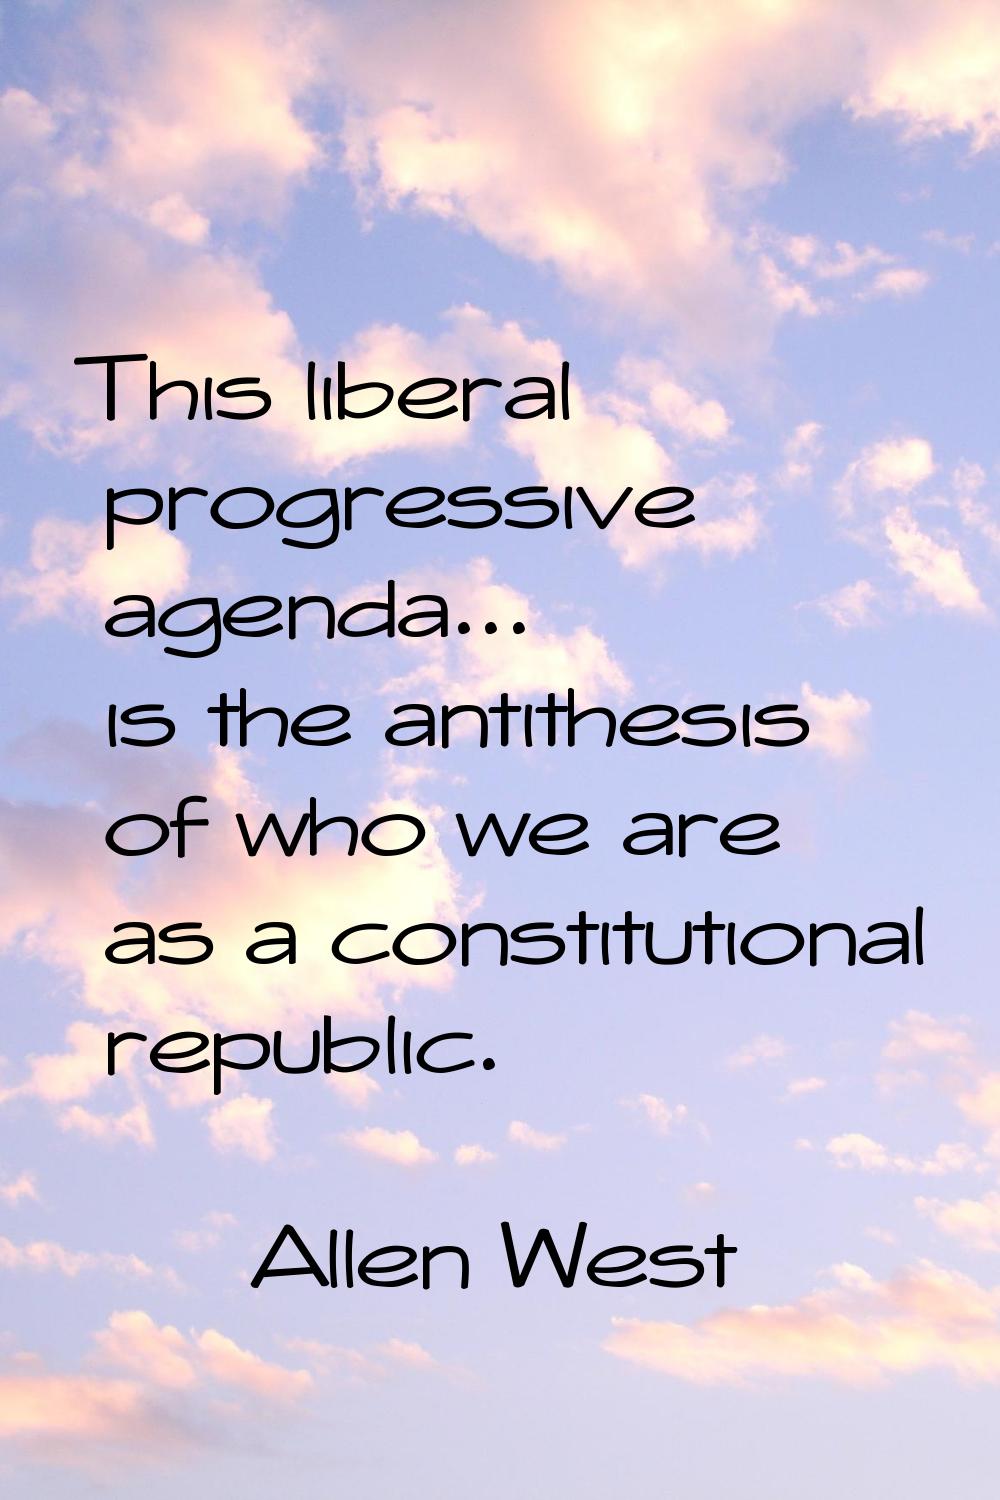 This liberal progressive agenda... is the antithesis of who we are as a constitutional republic.